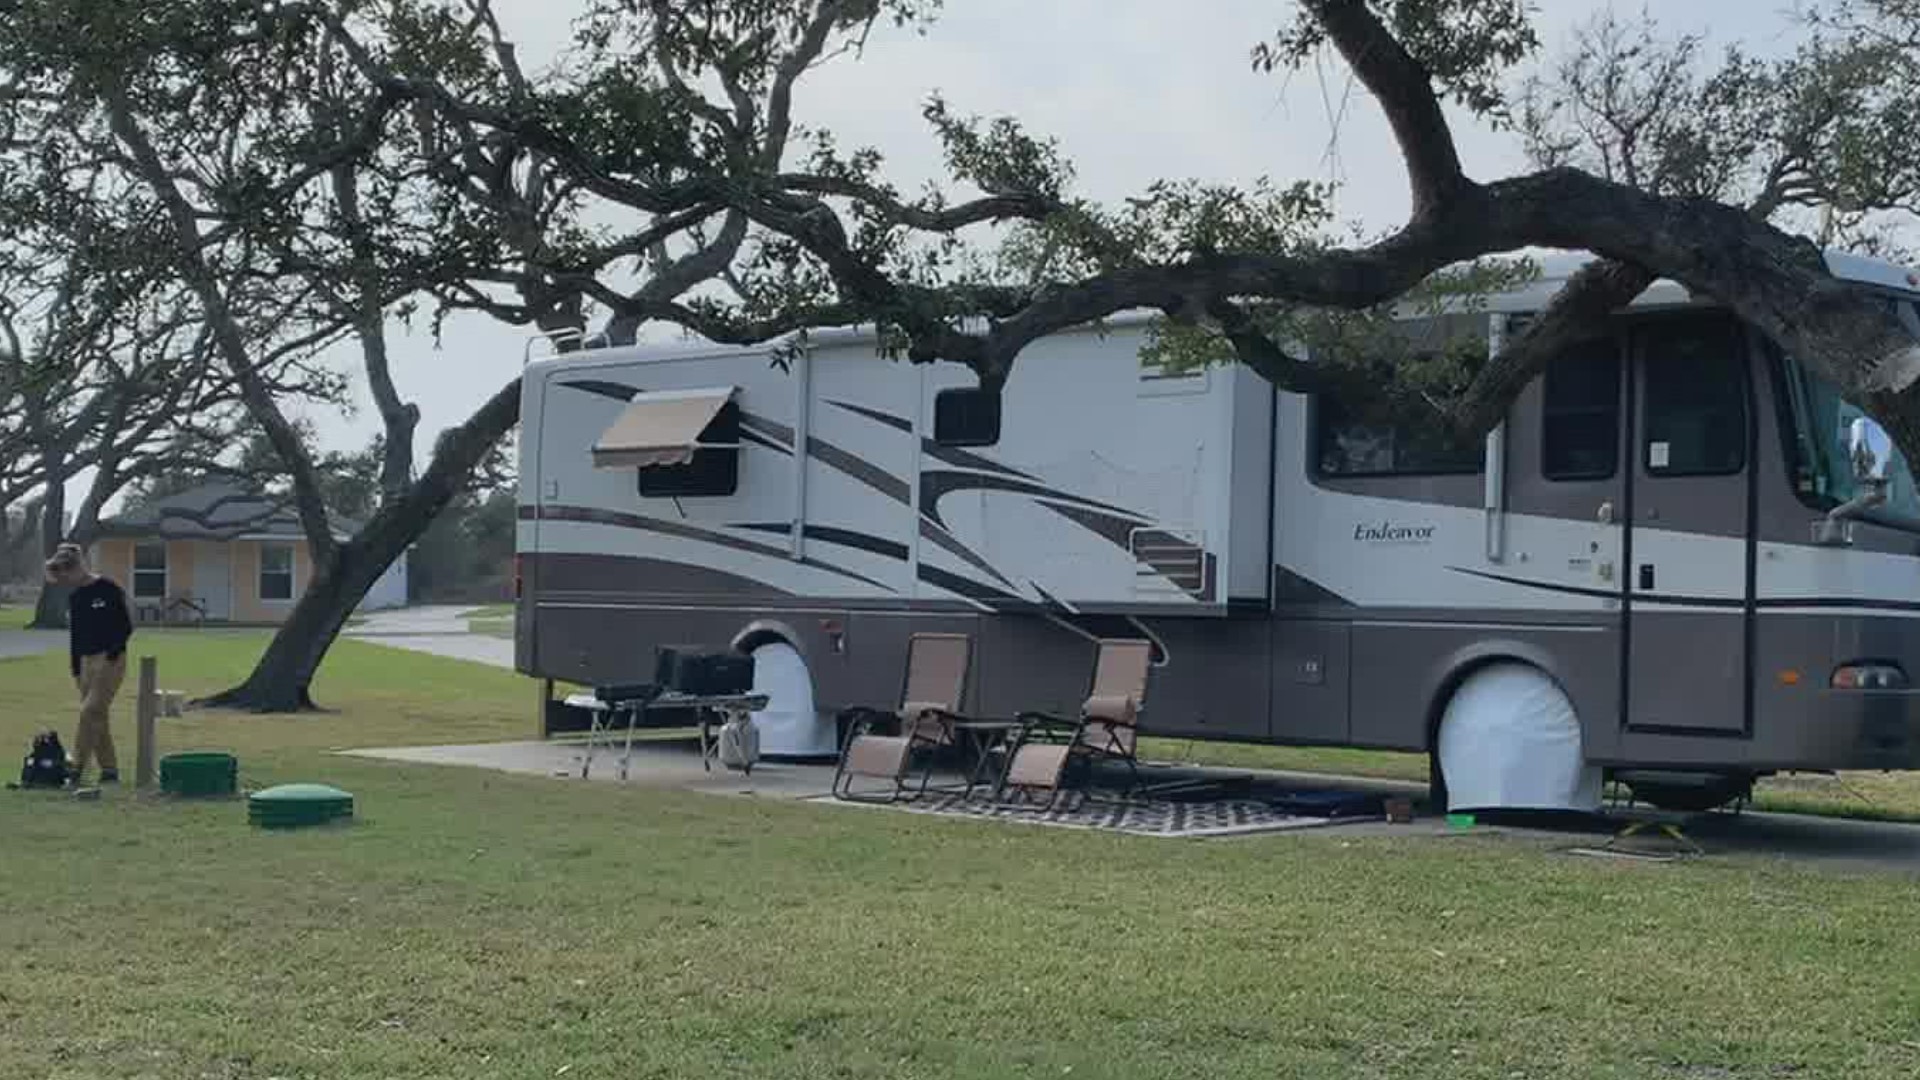 There are at lest 6,000 RV sports in Aransas County alone.